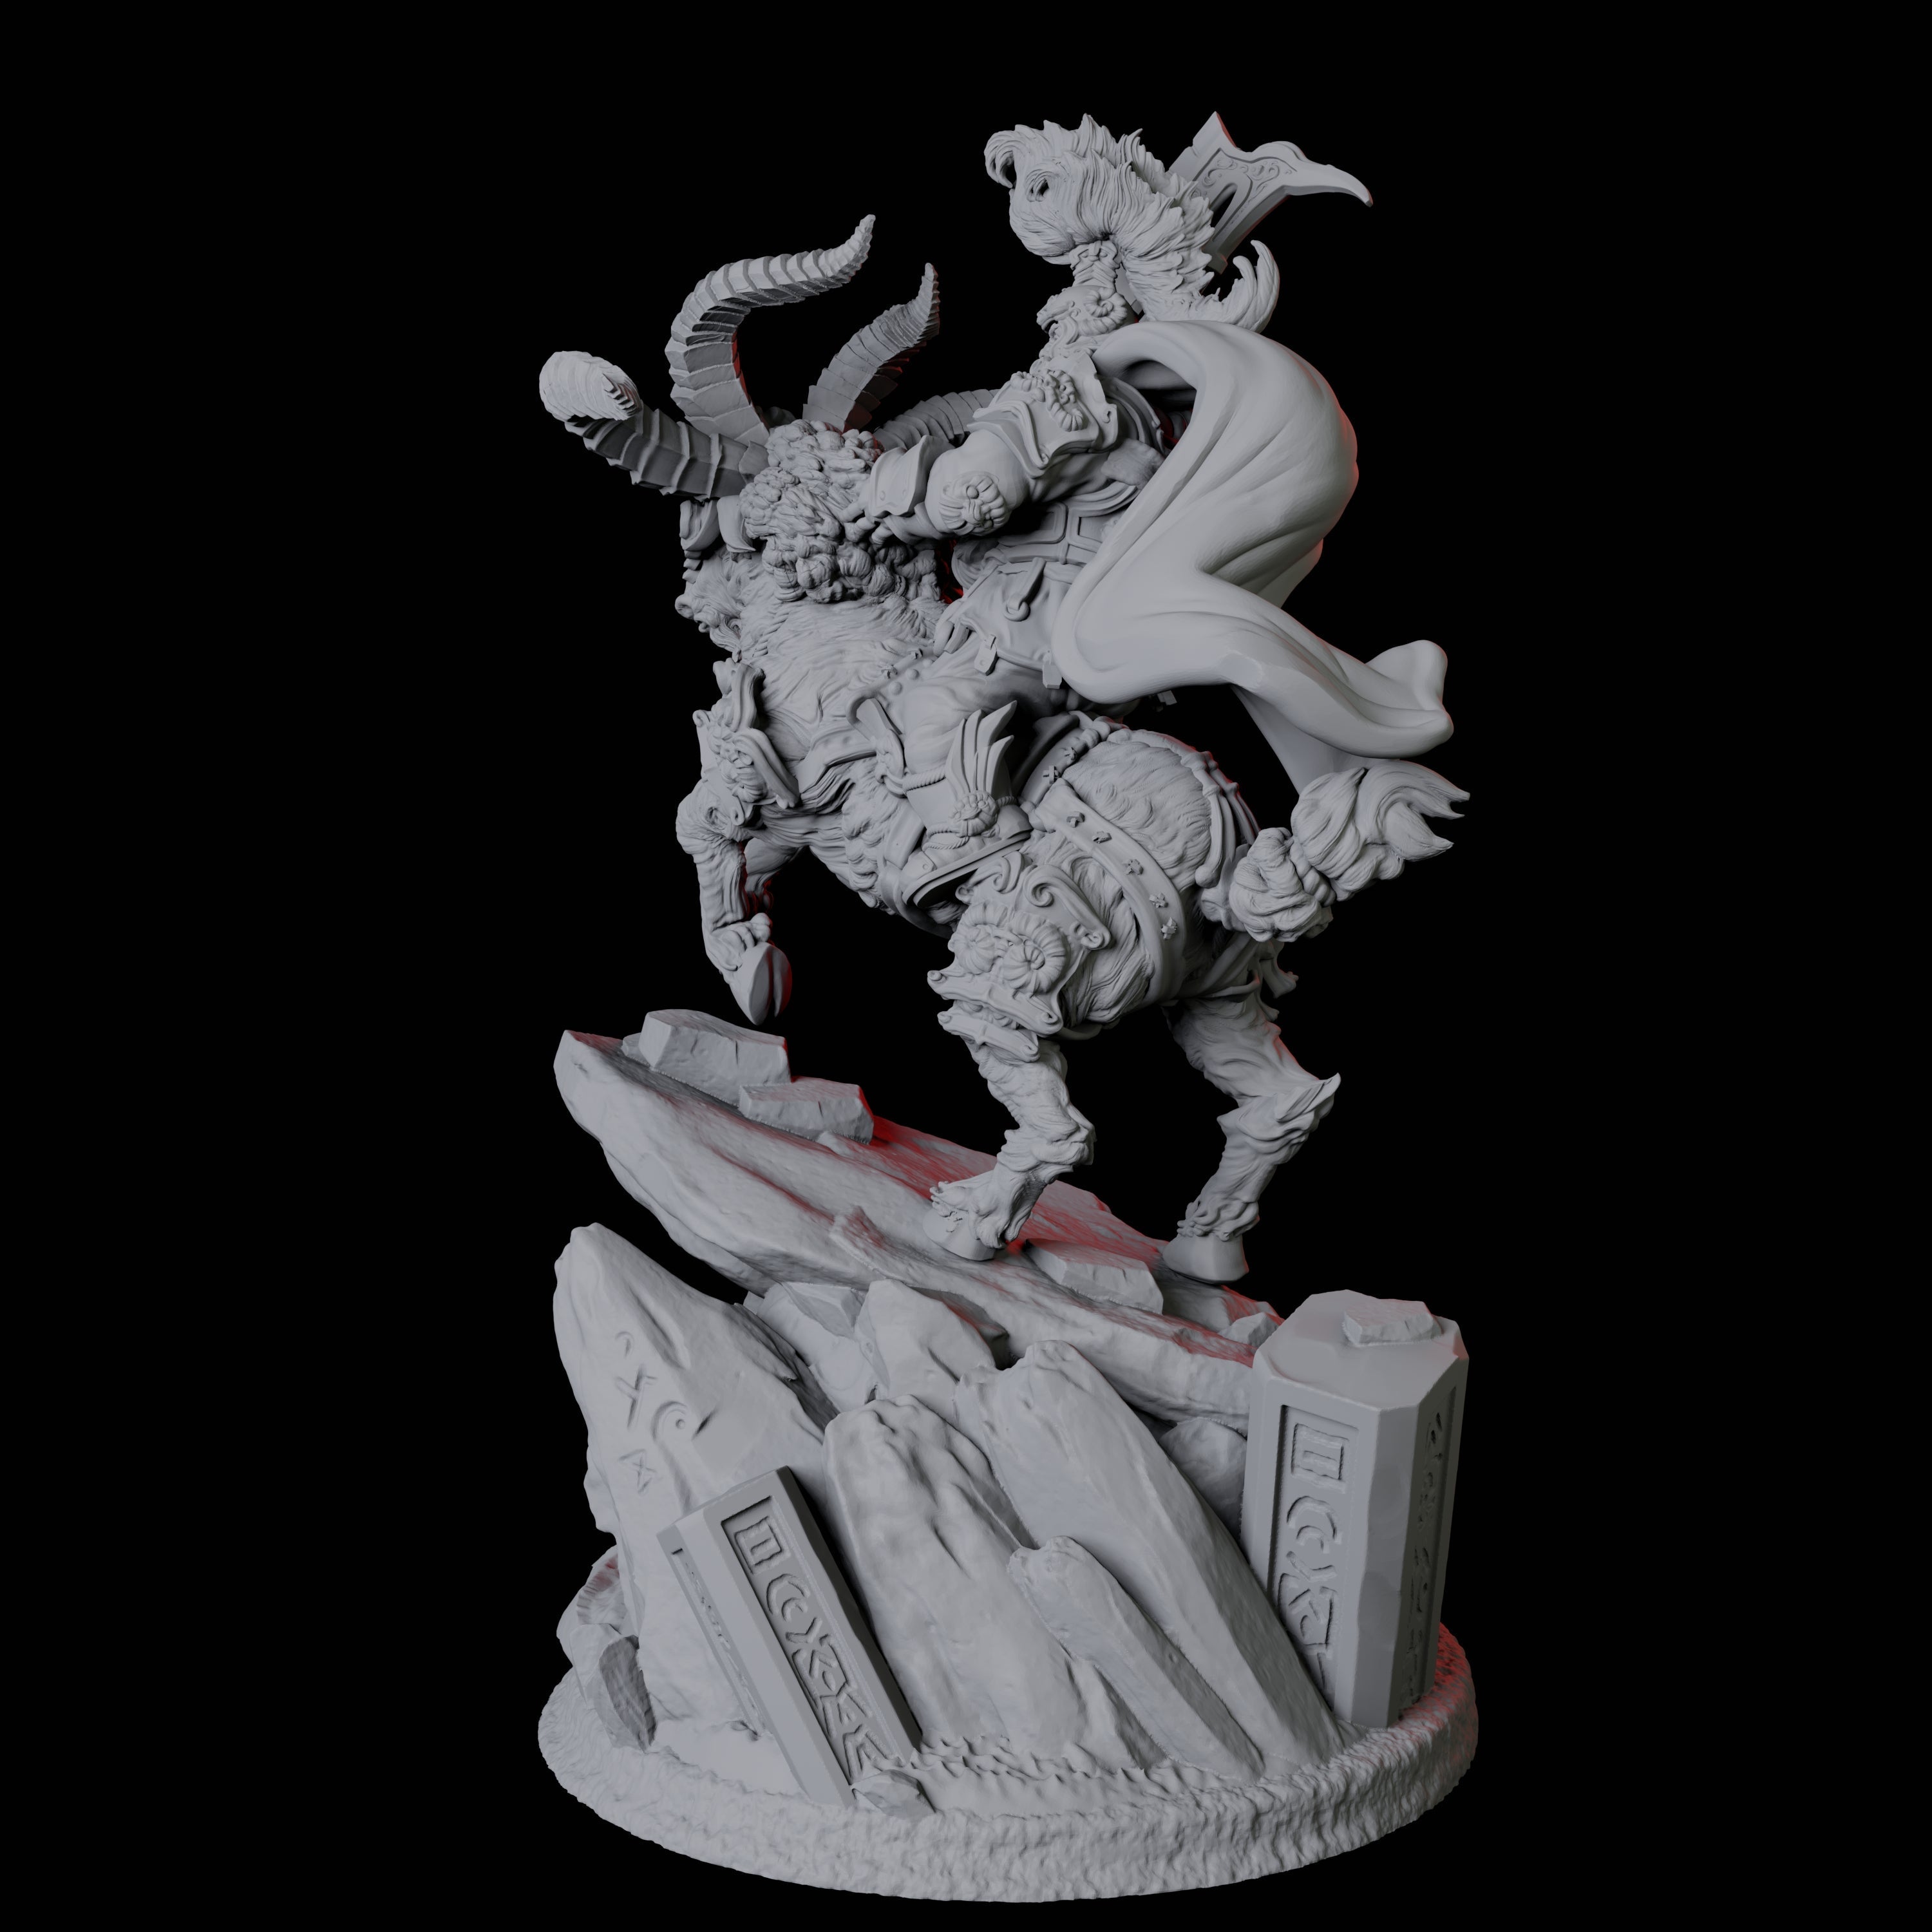 Goat Mounted Dwarf Warrior A Miniature for Dungeons and Dragons, Pathfinder or other TTRPGs